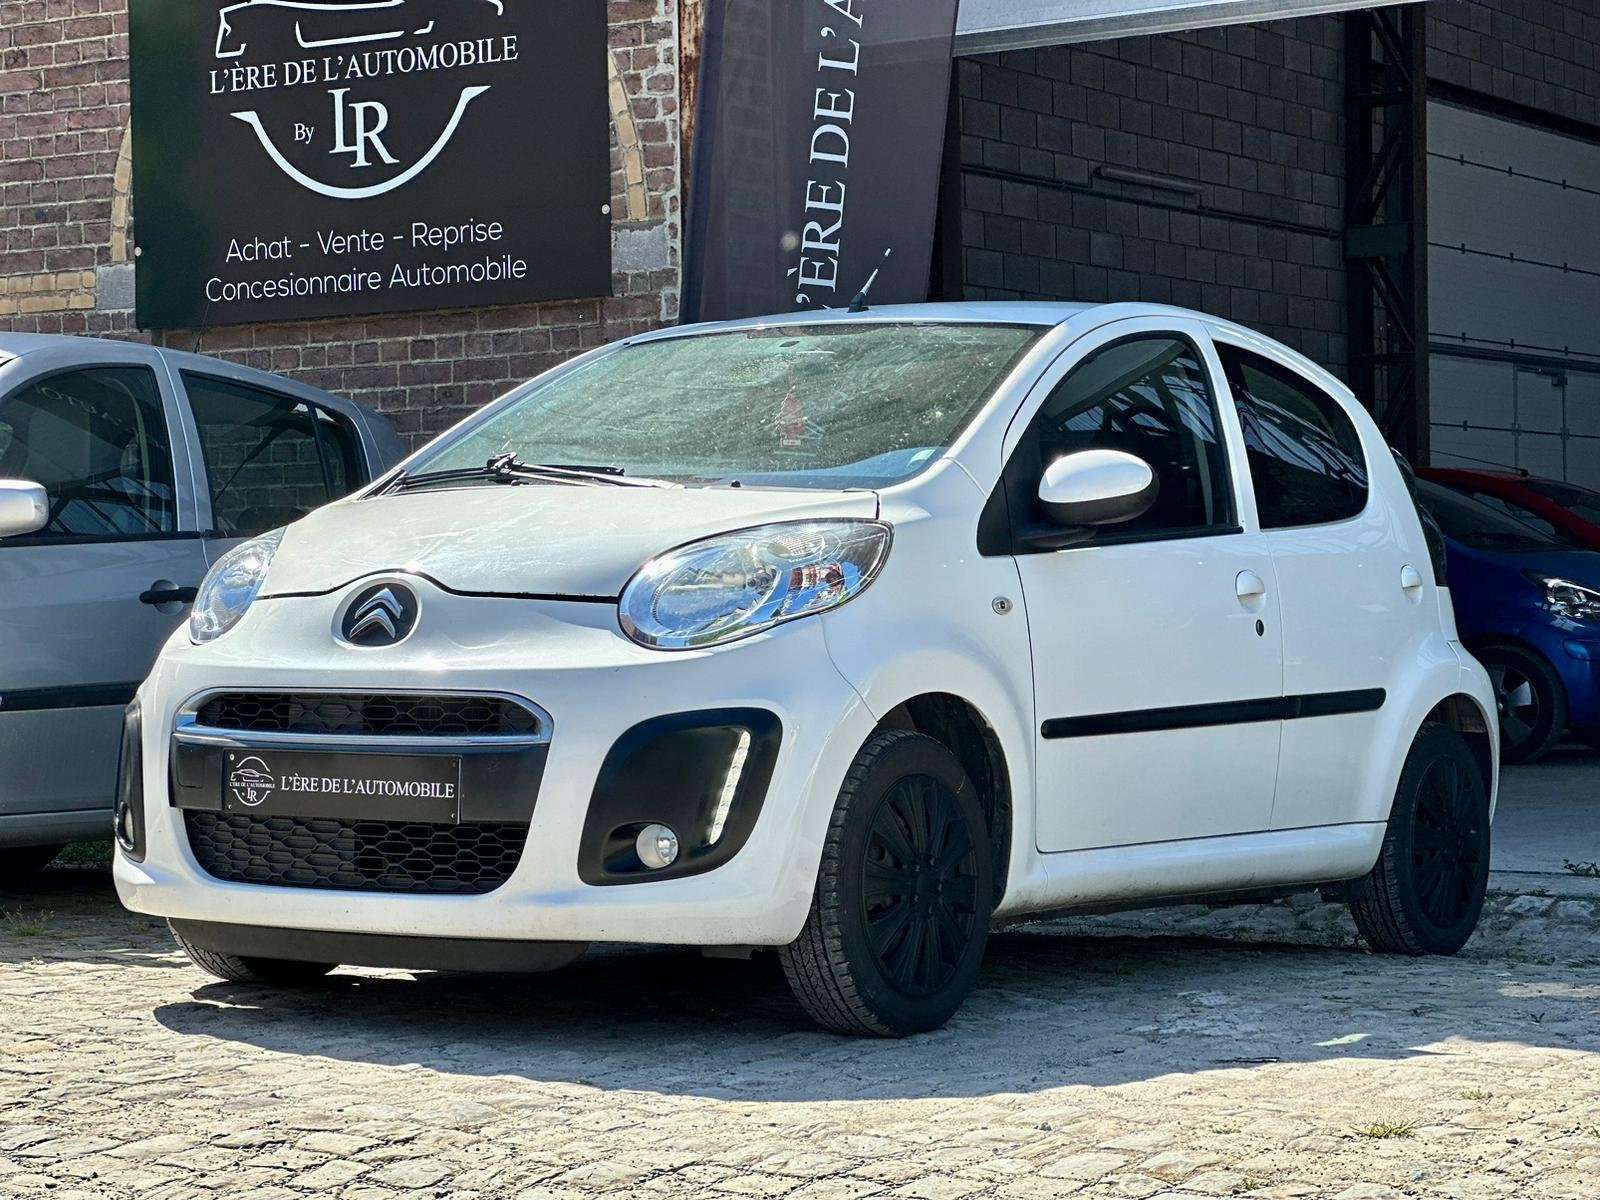 Citroen C1 Compact in White used in Liège for € 4,550.-